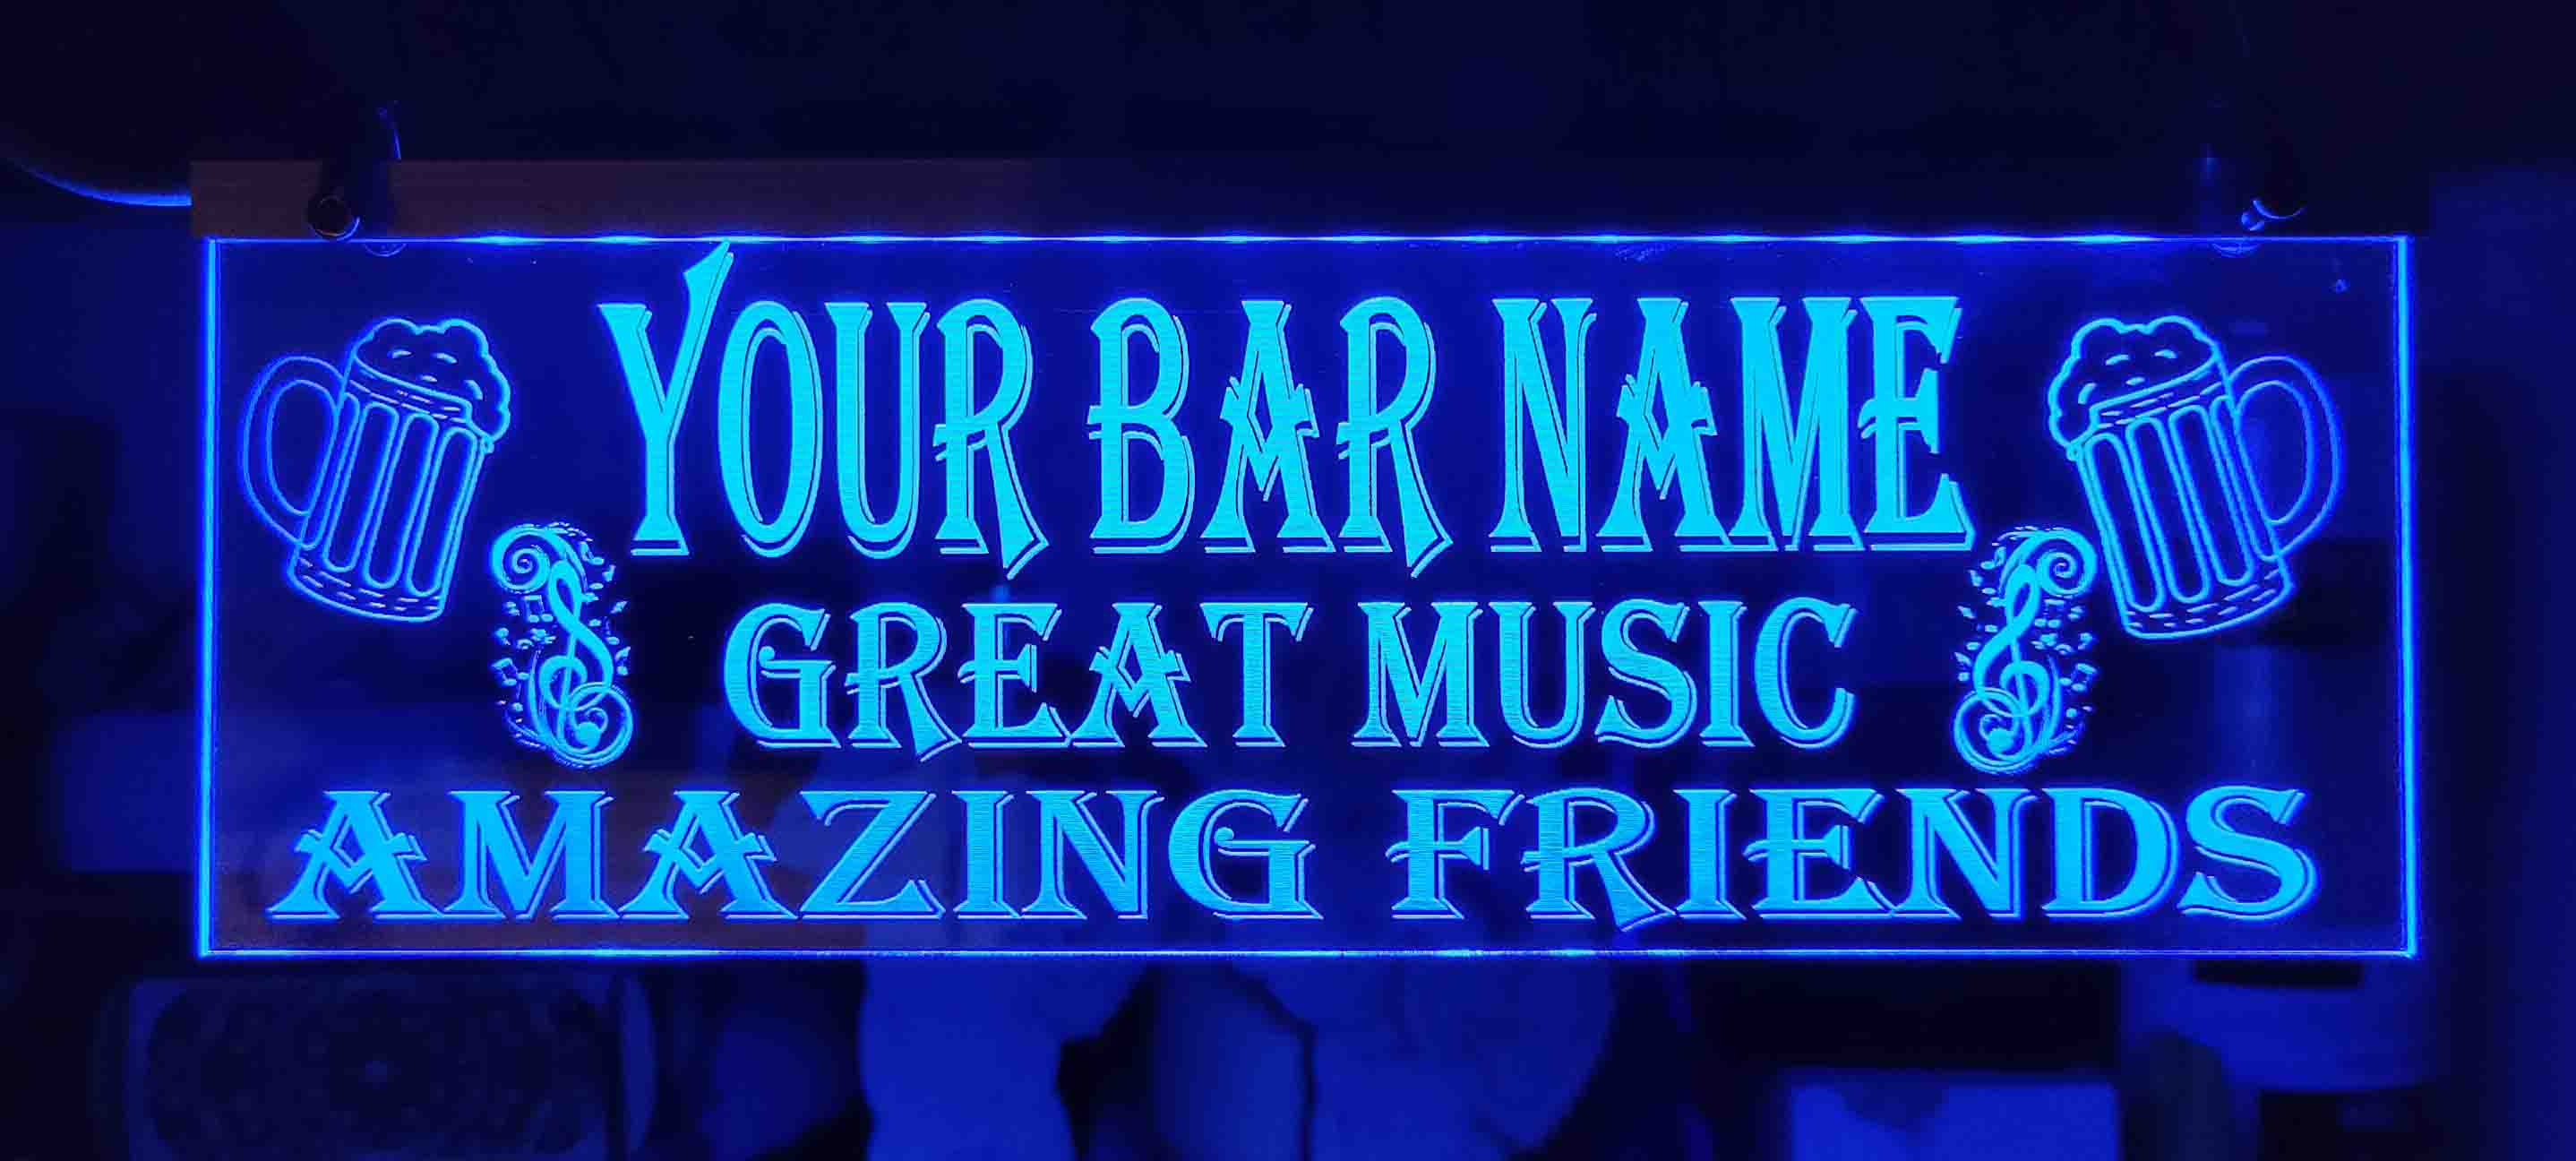 great music and amazing friends bar sign with your bar name engraved